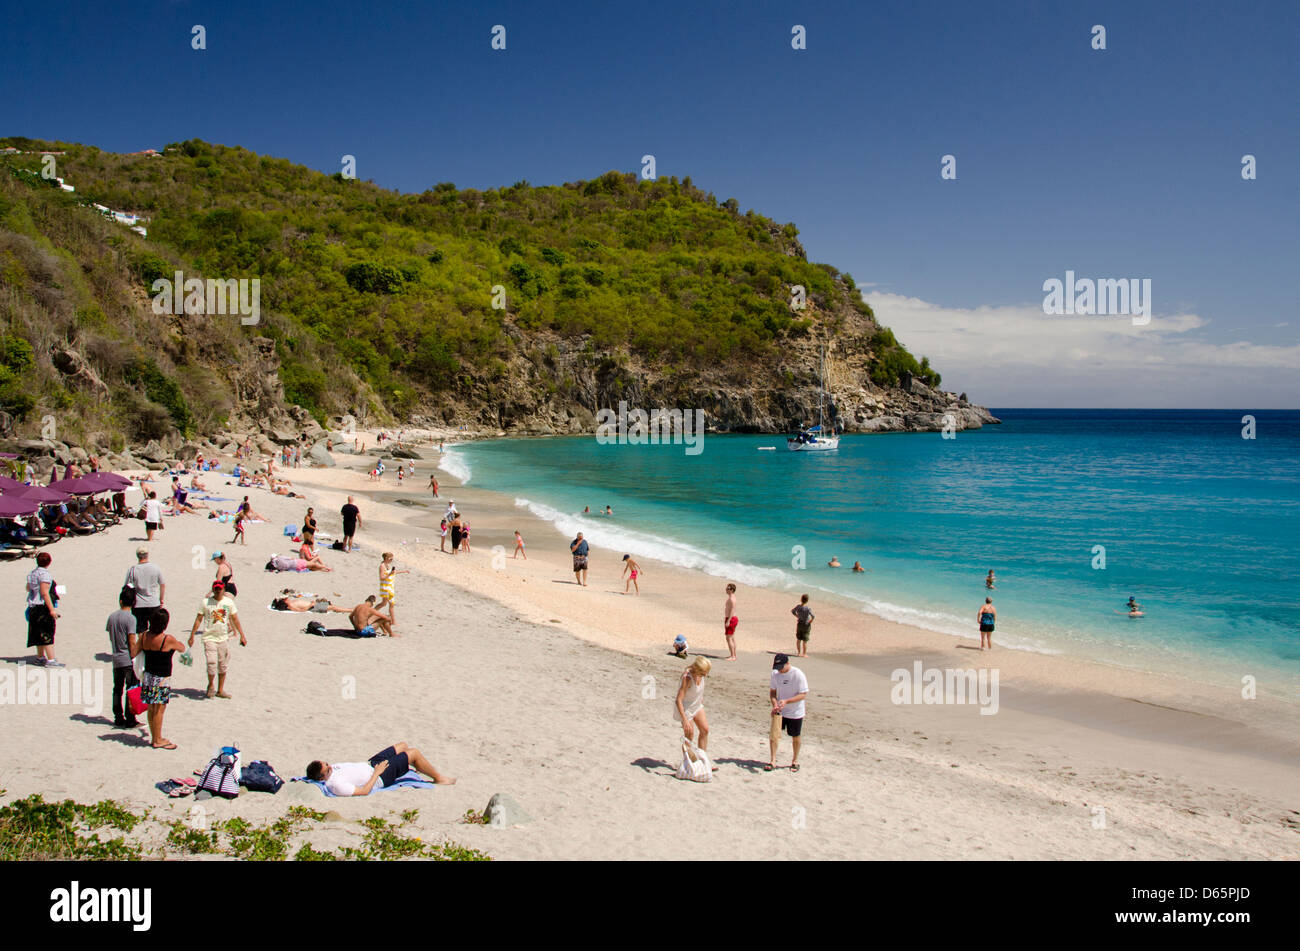 St Barths St Barts downtown Stock Photo - Alamy